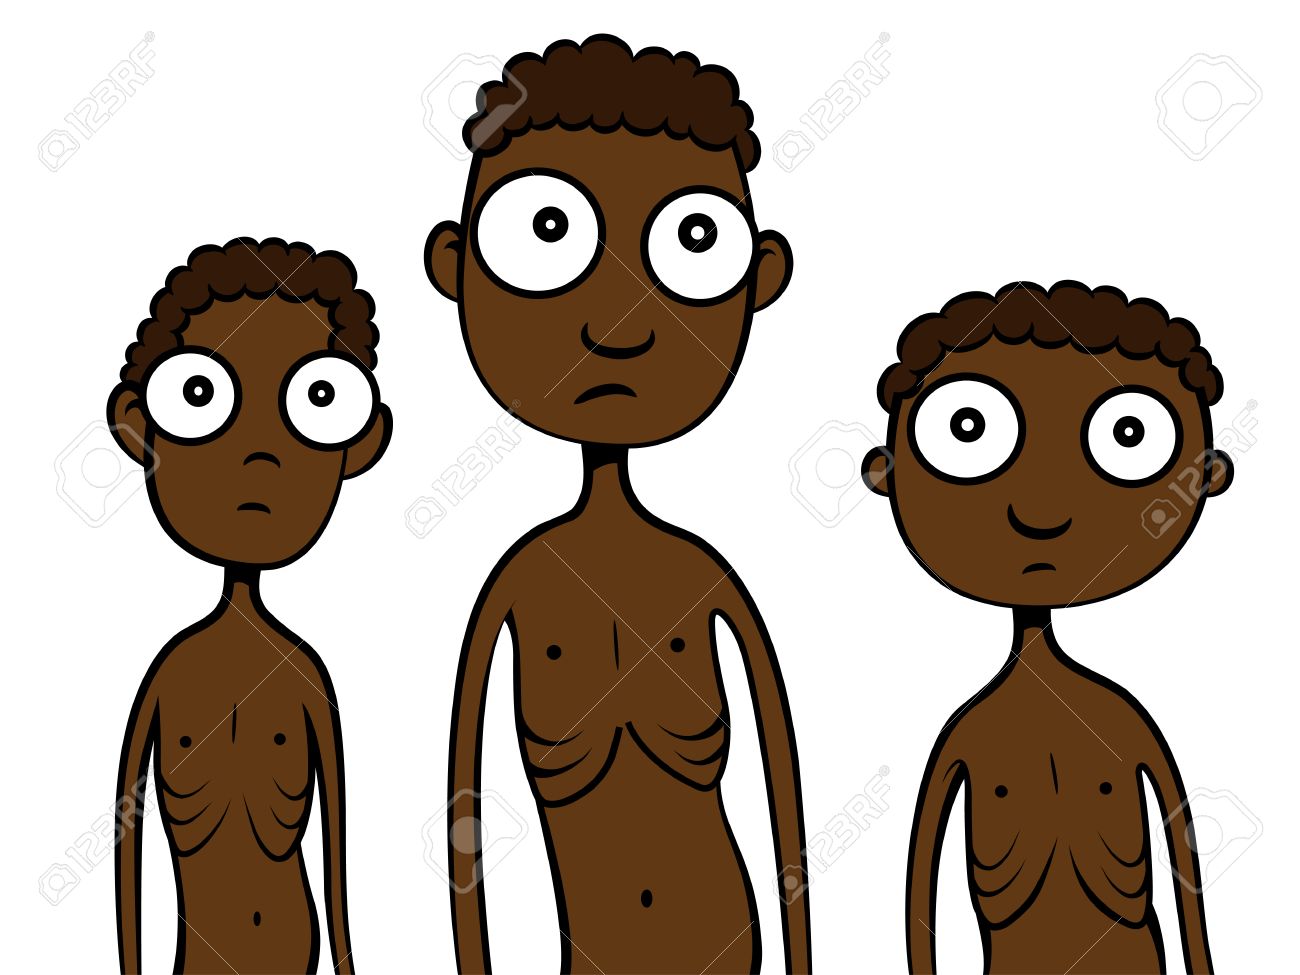 Cartoon vector illustration of skinny hungry African children.